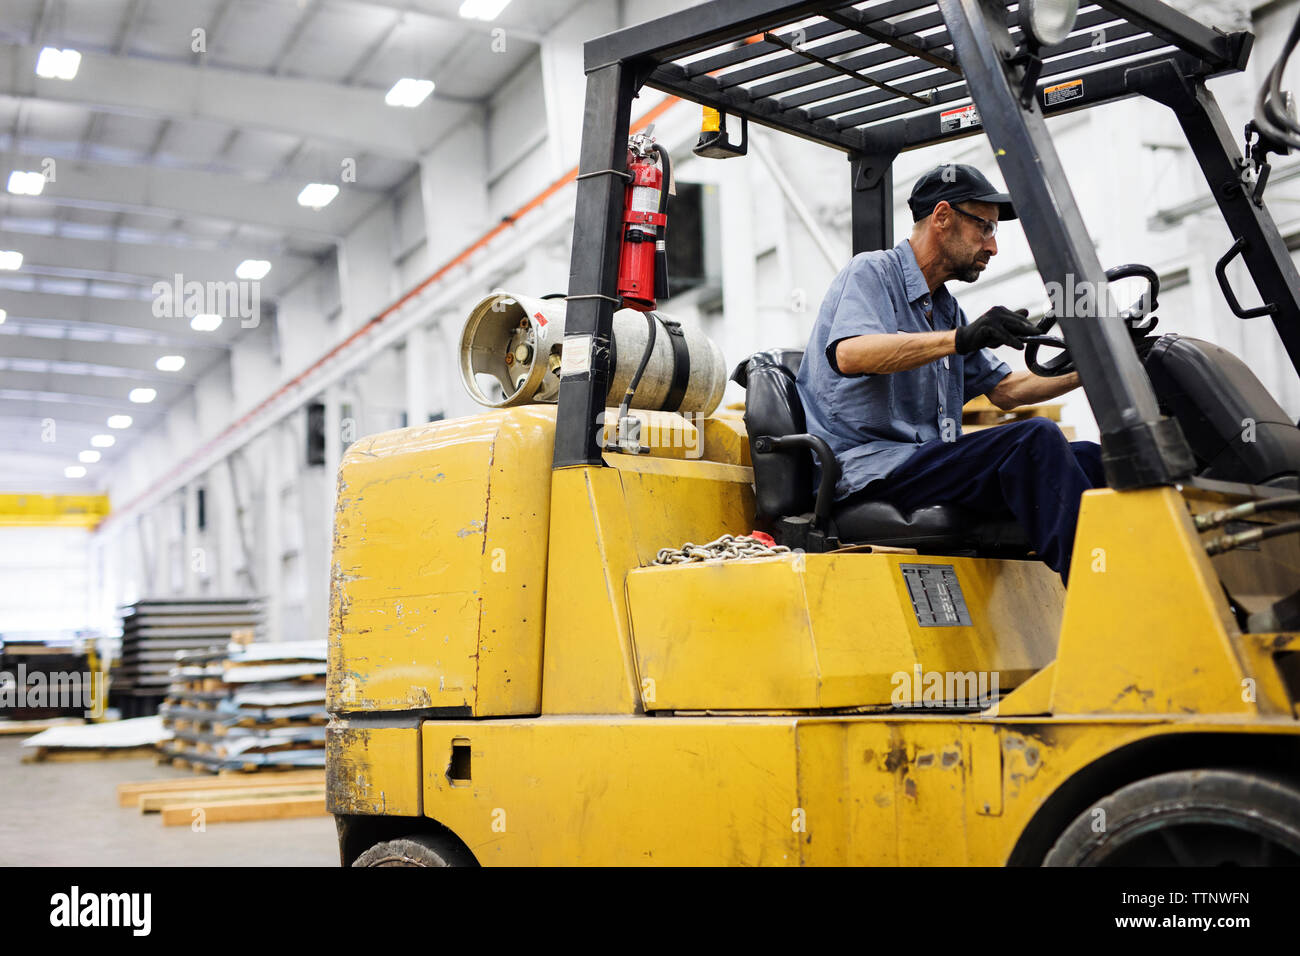 Travailleur homme driving forklift in warehouse Banque D'Images